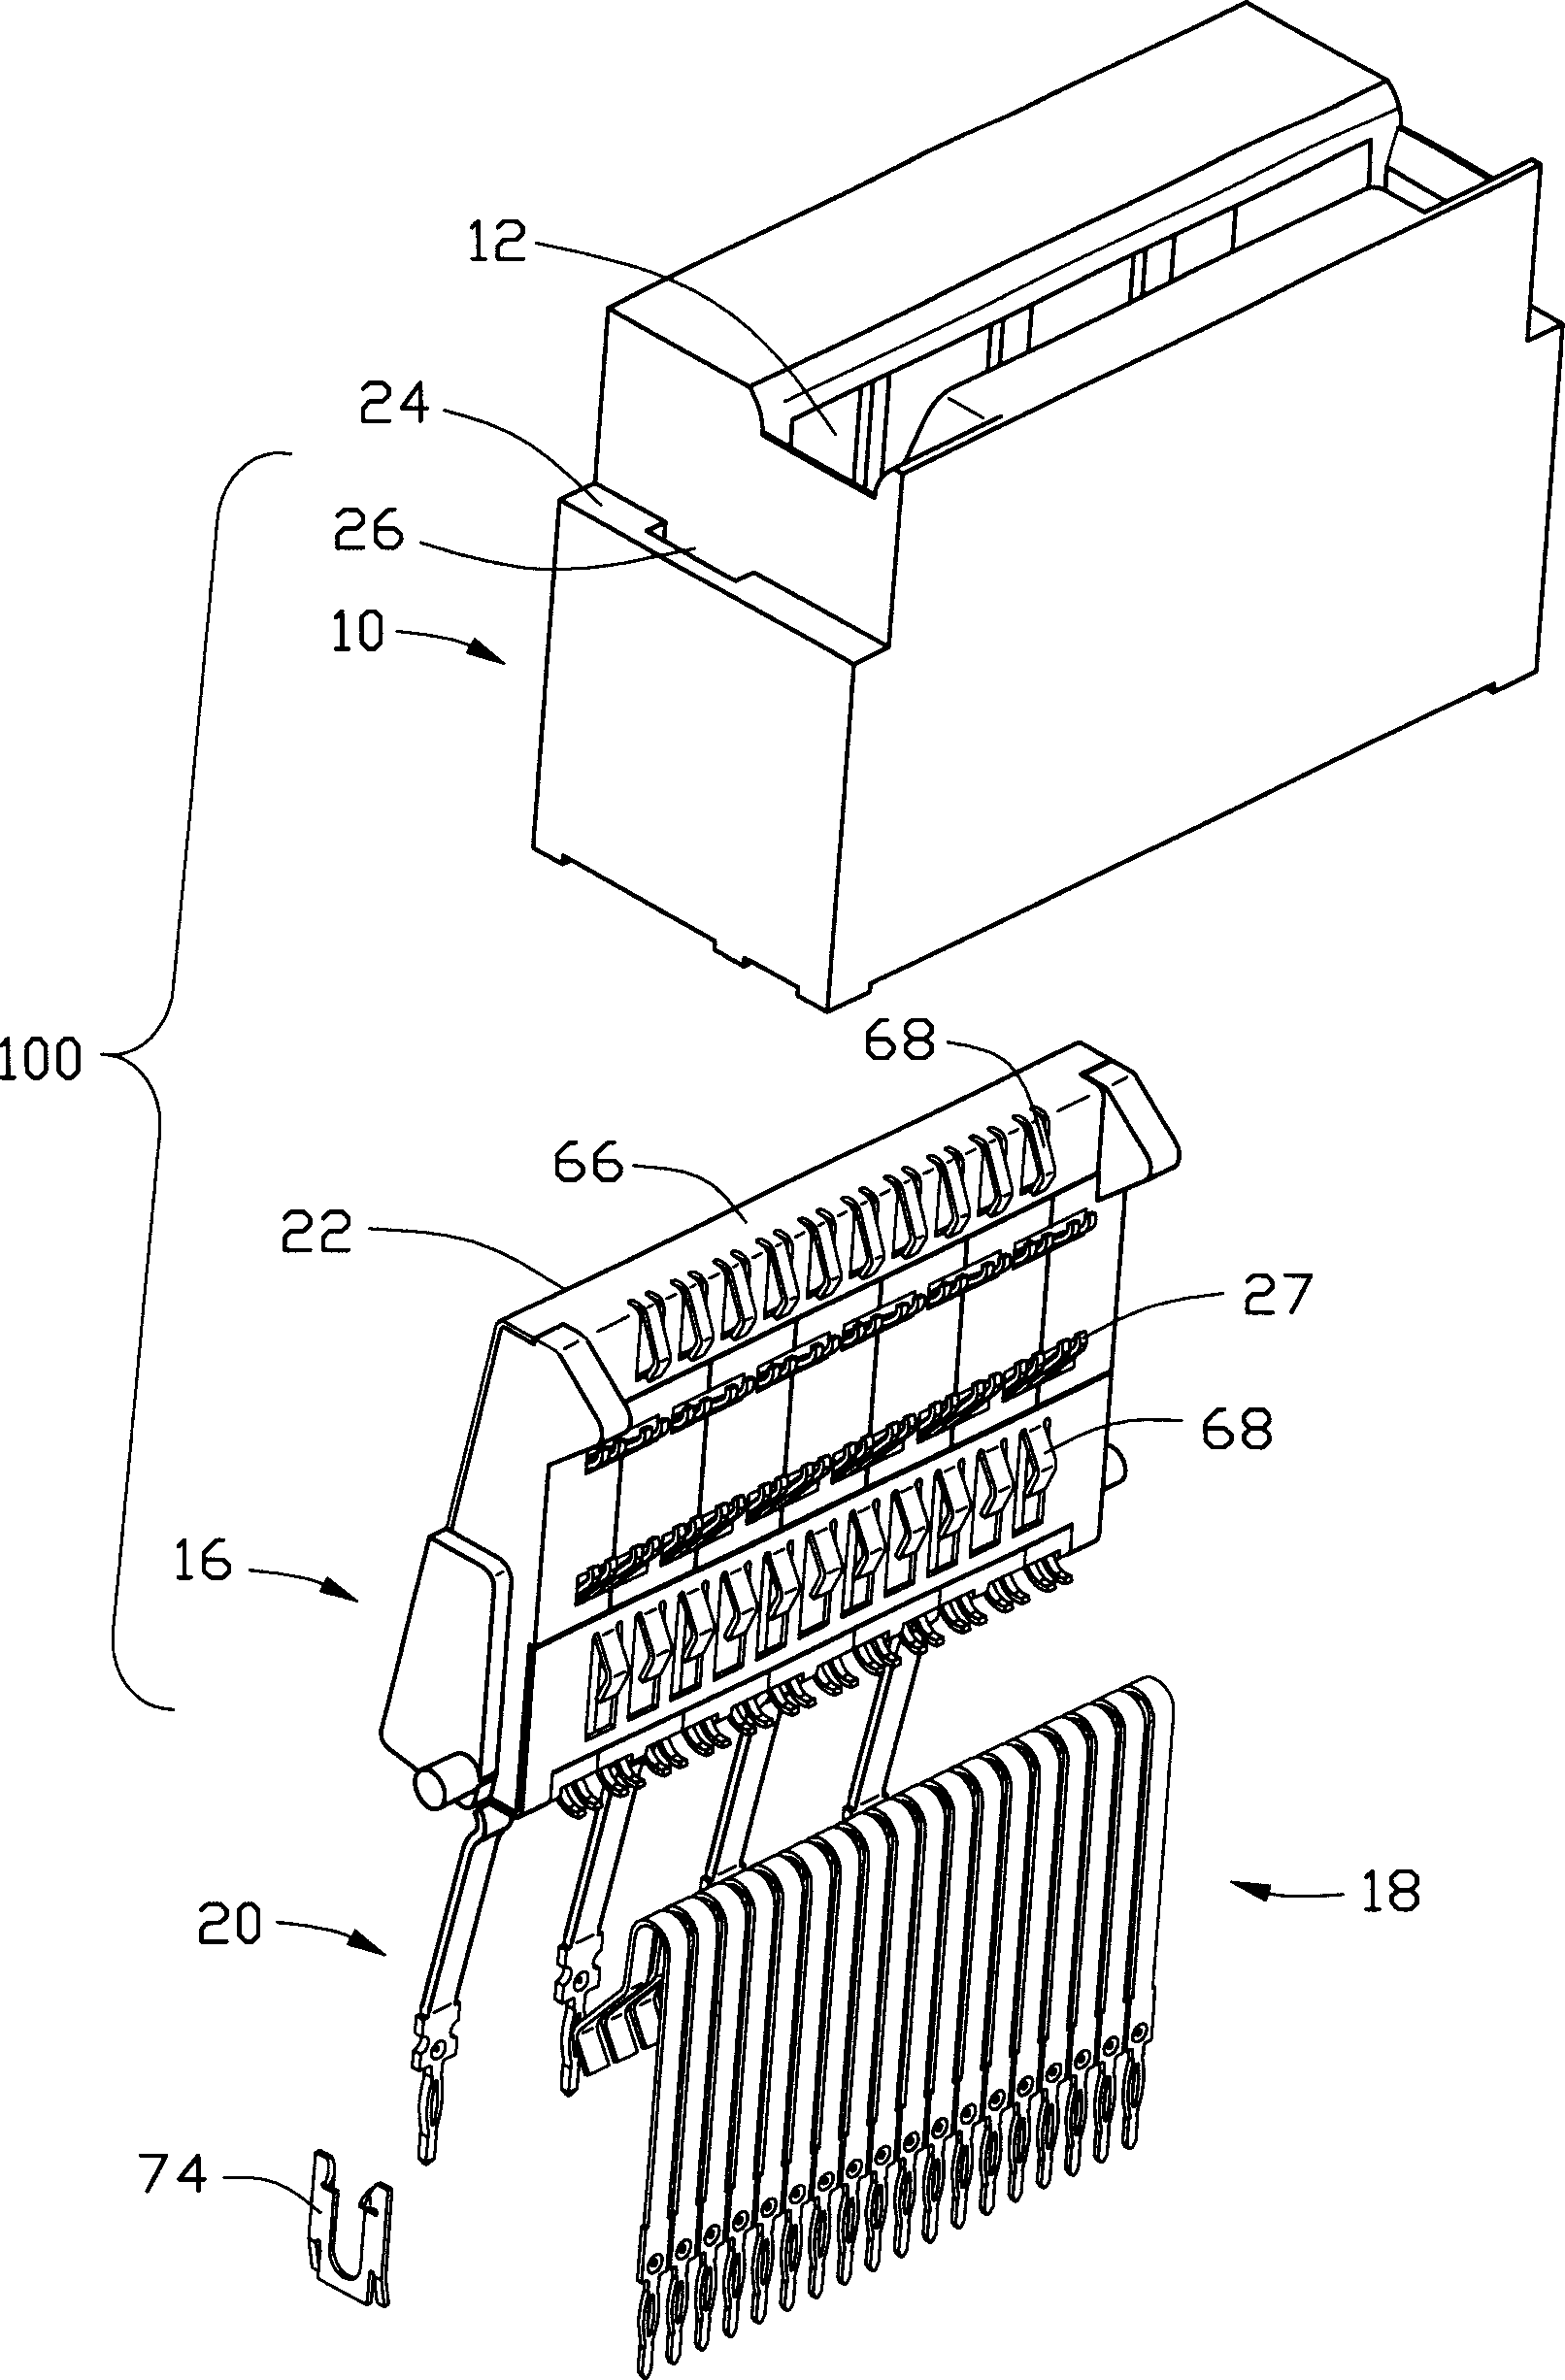 Backplate connector